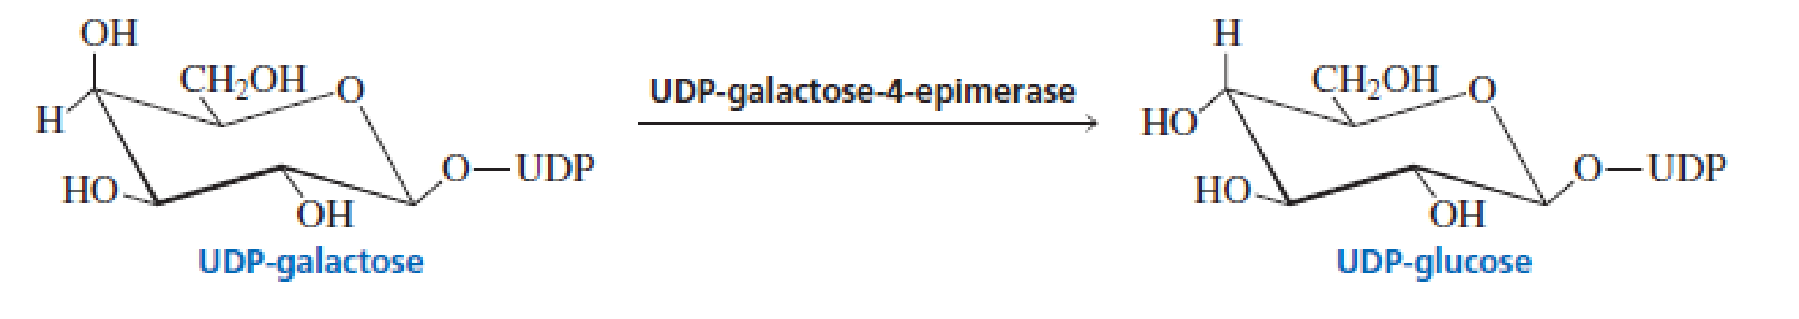 Chapter 19, Problem 45P, UDP-galactose-4-epimerase converts UDP-galactose to UDP-glucose. The reaction requires NAD+ as a 